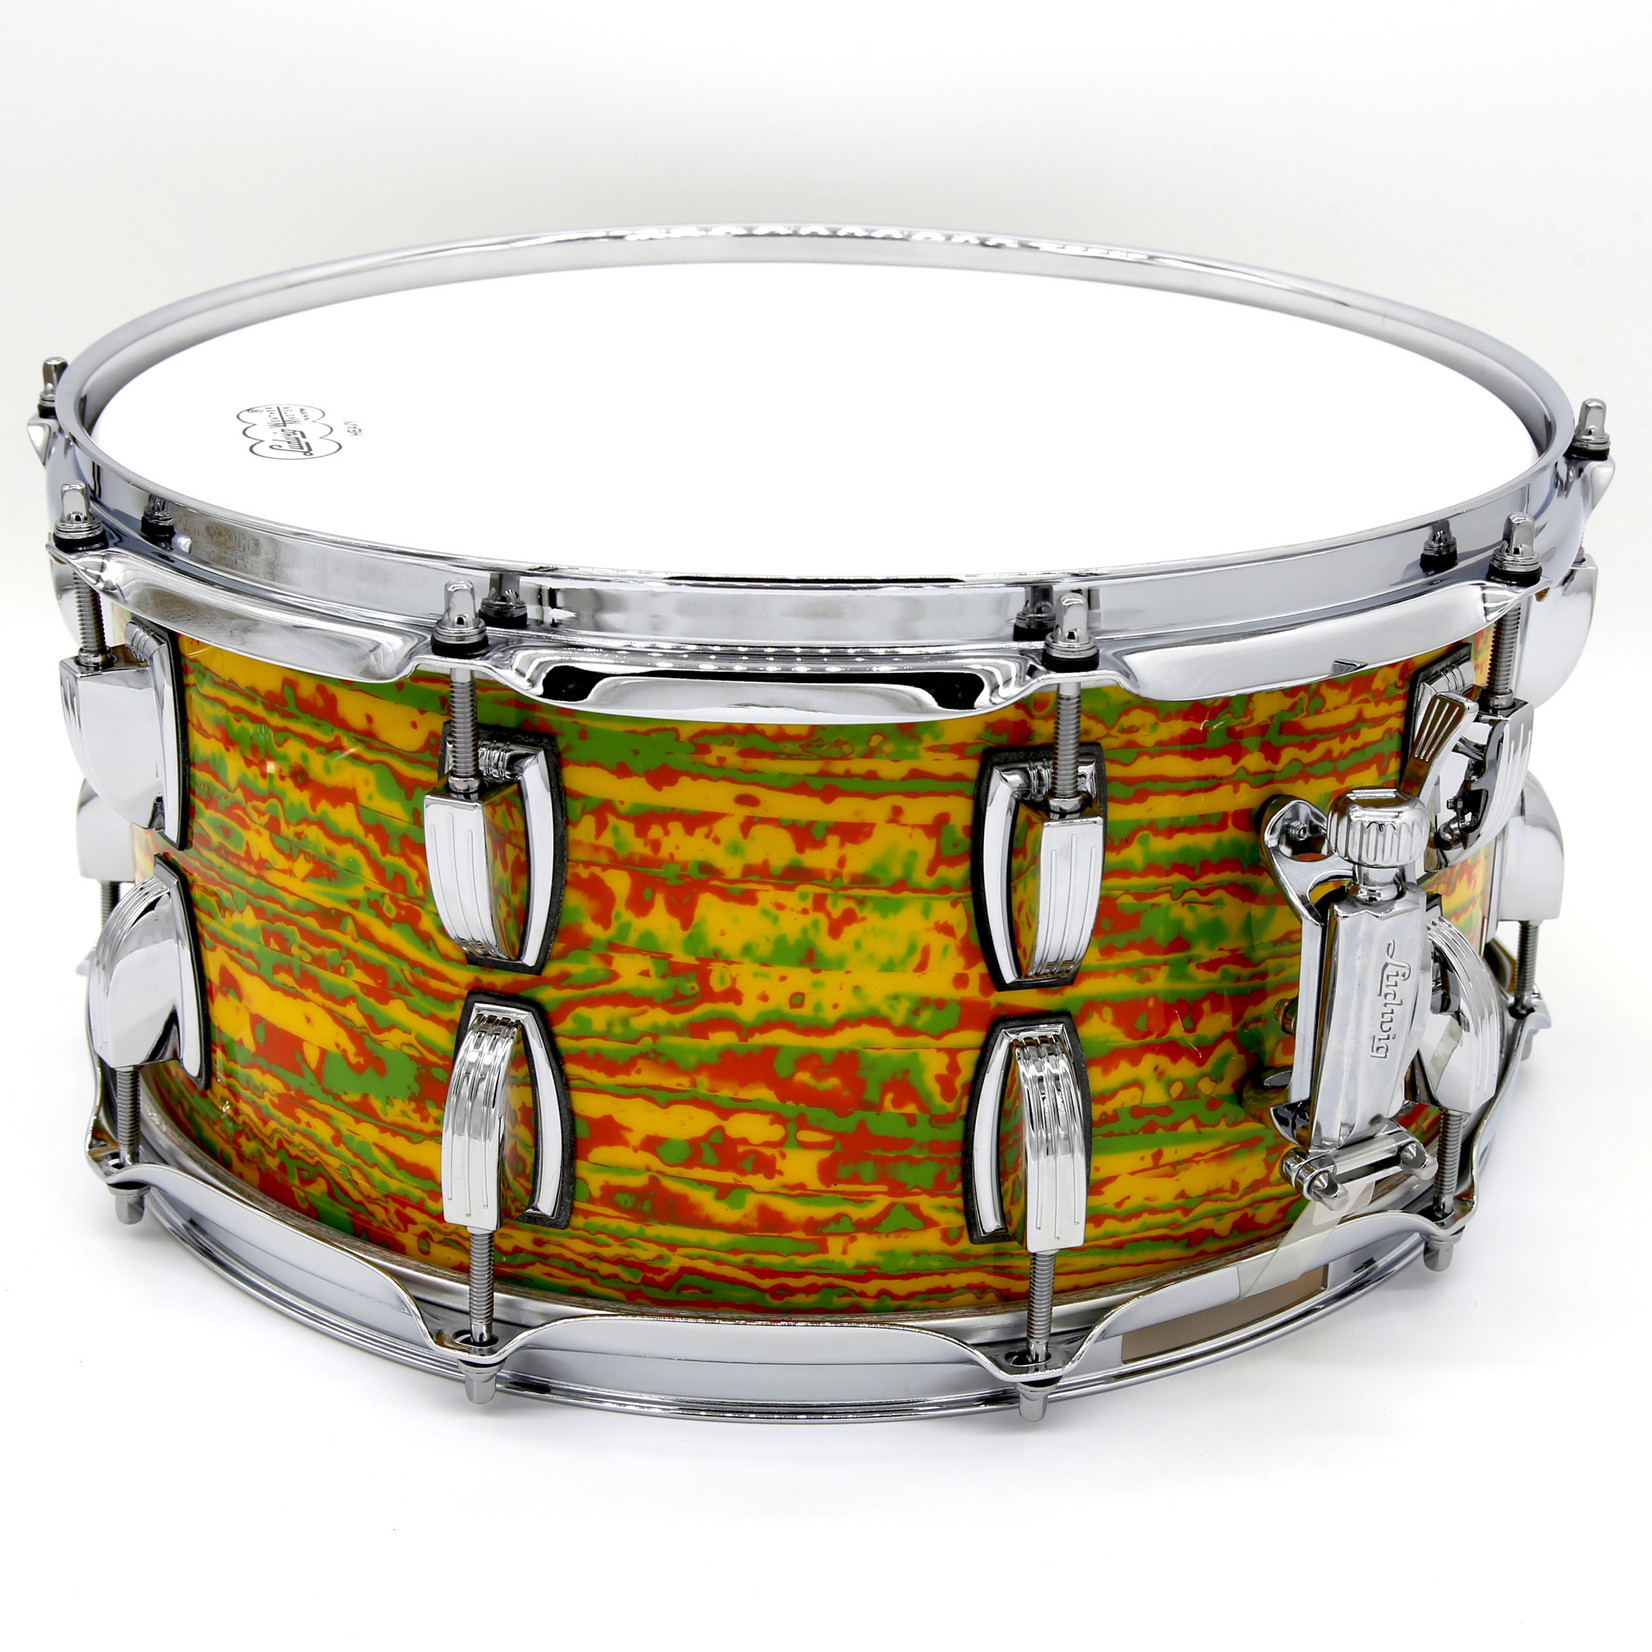 Ludwig Ludwig Classic Maple 6.5x14" Snare (Citrus Mod)